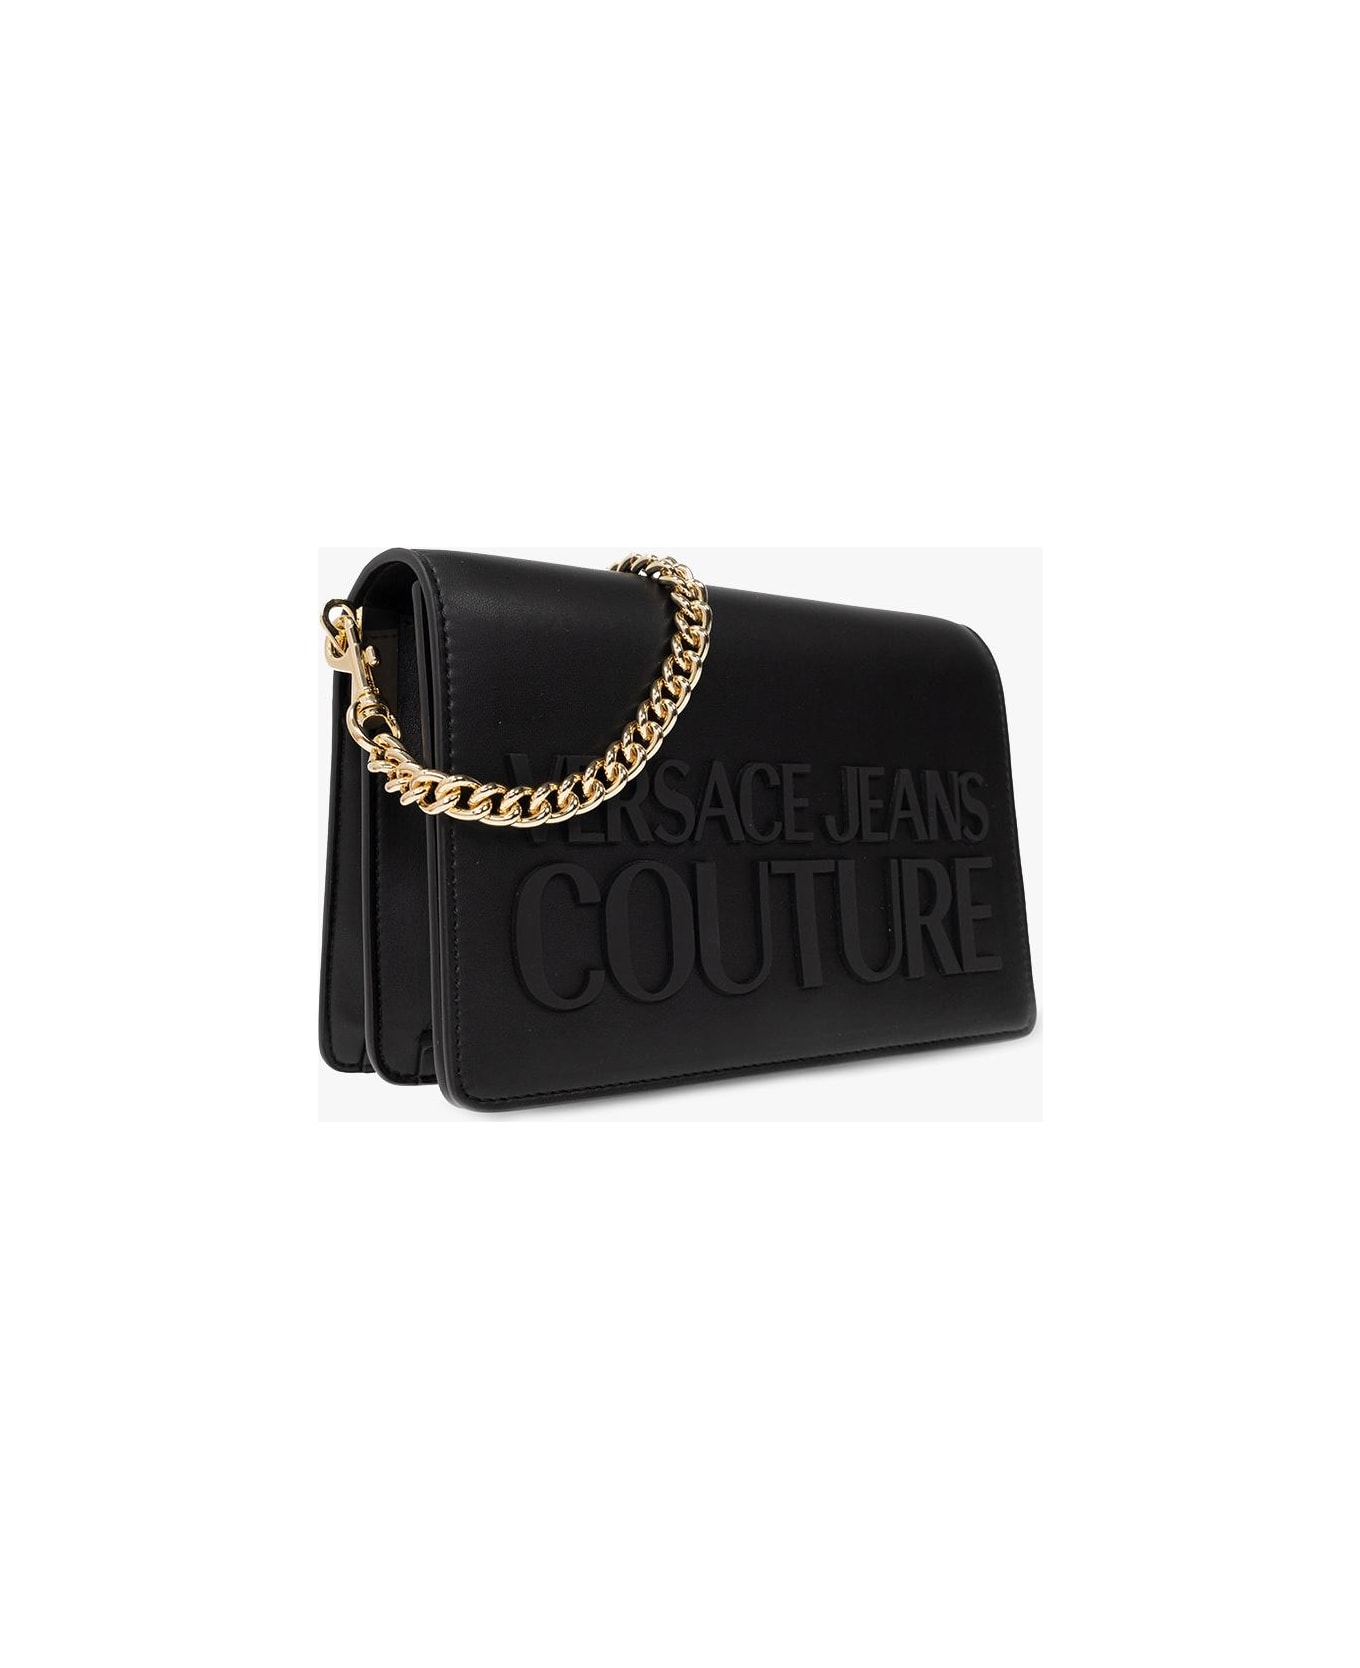 Versace Jeans Couture Bag - NERO クラッチバッグ